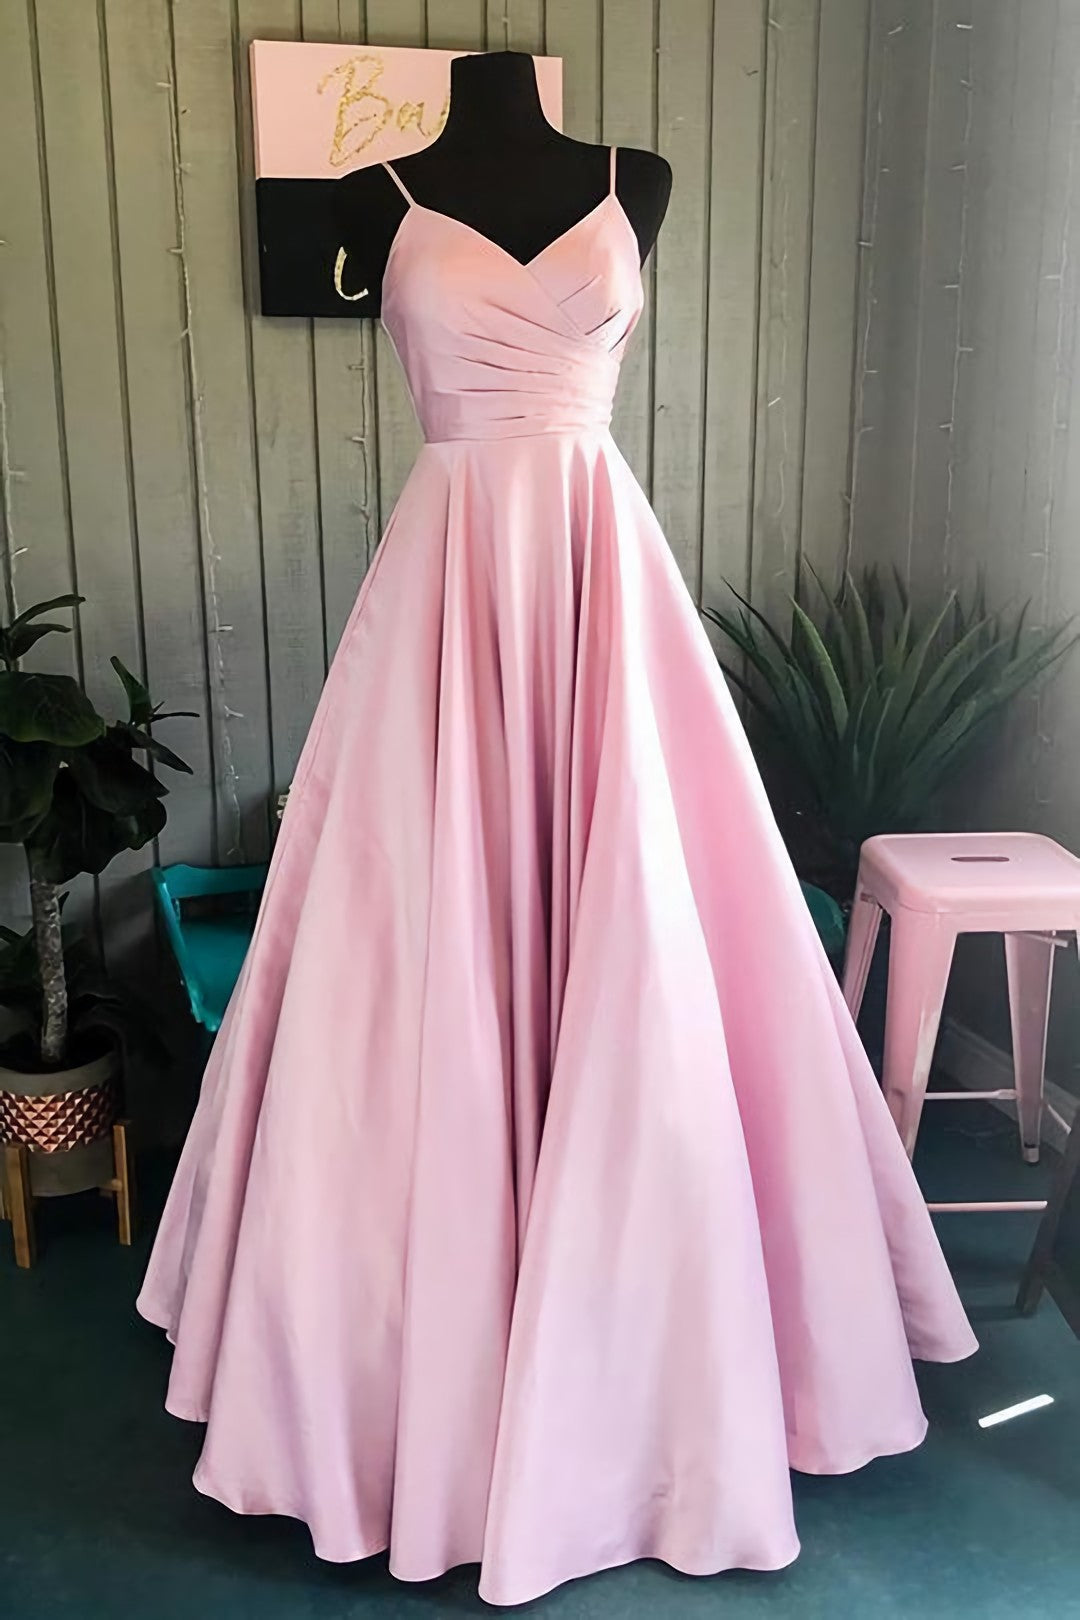 Elegant Pleated A Line Pink Customized Floor Length Long Corset Prom Dress, Ae893 outfit, Formal Dress Classy Elegant